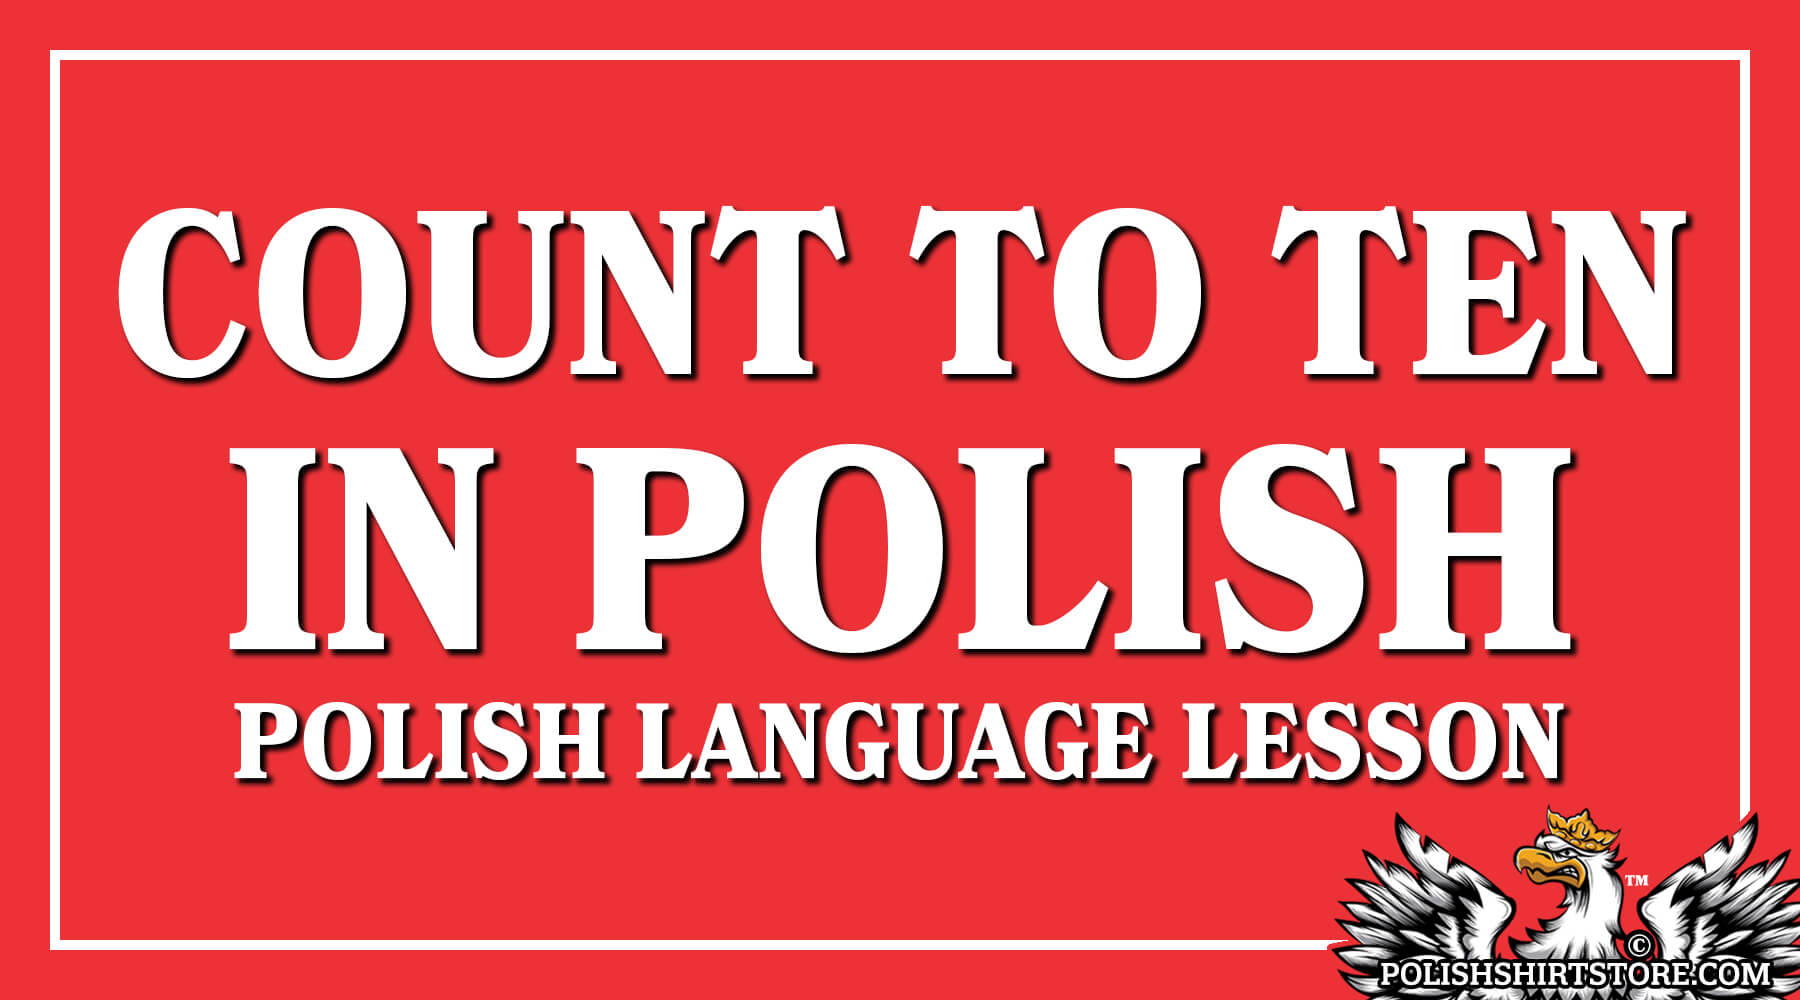 How To Count To Ten In Polish